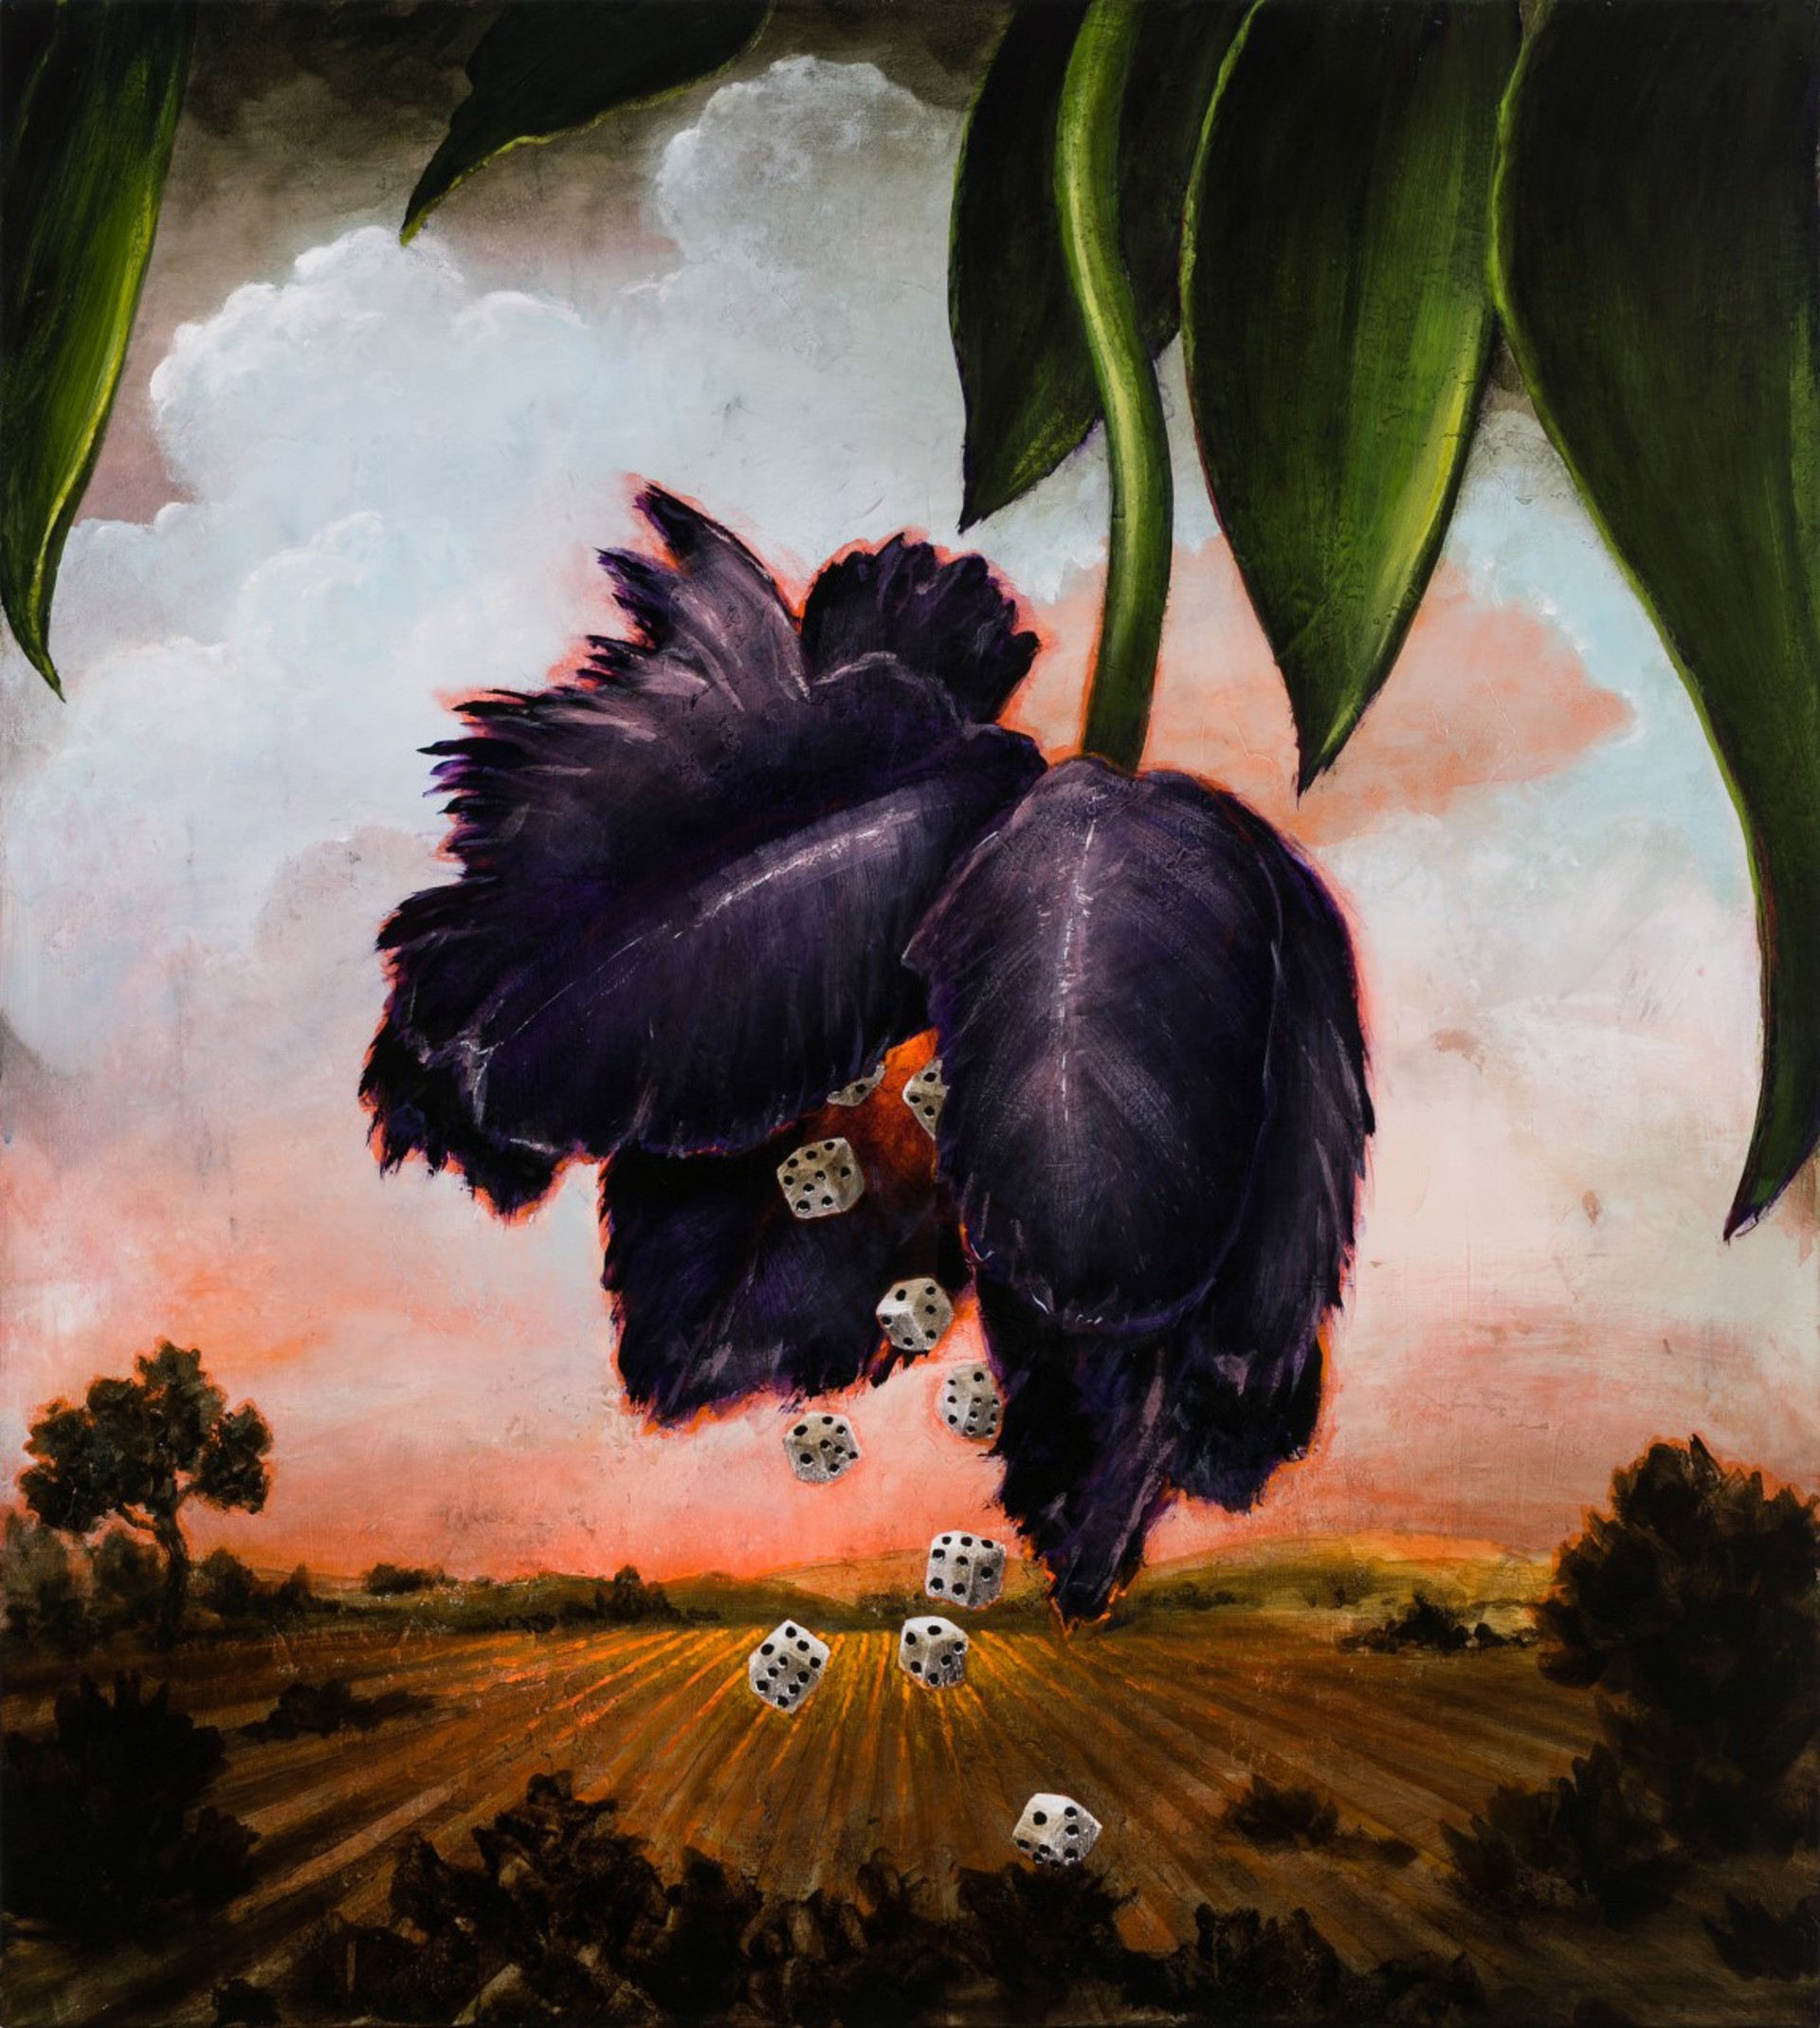 Harvest with Opportunities by Kevin Sloan